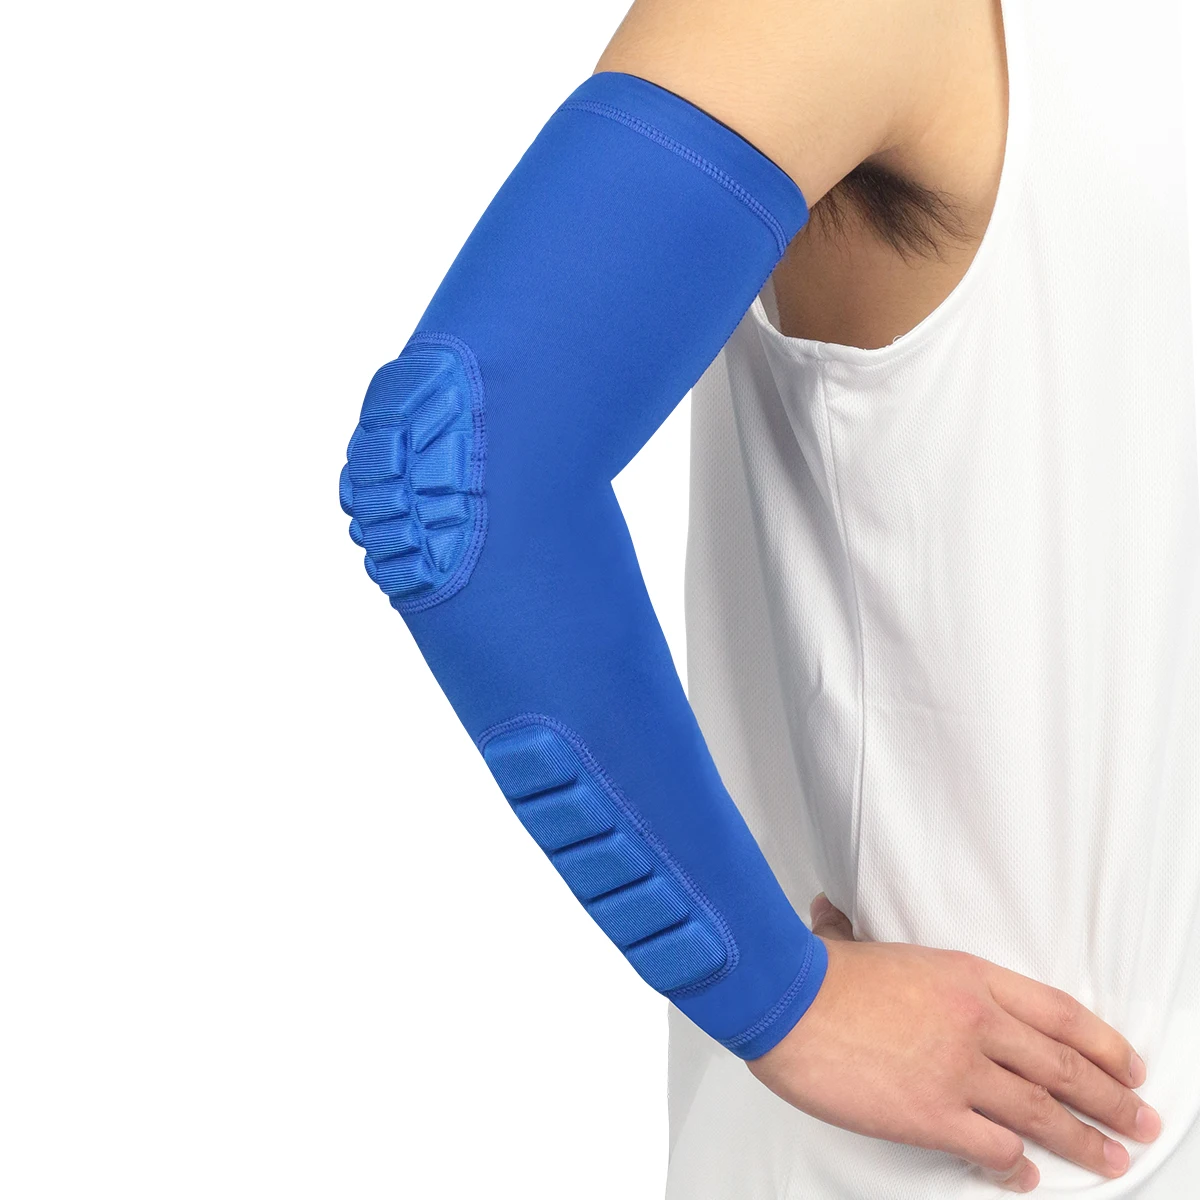 Miaomiaogo 1pc Sponge Crashproof Armguards Elbow Pad Elbow Care Knee Protector For Basketball Soccer Outdooor Sports 